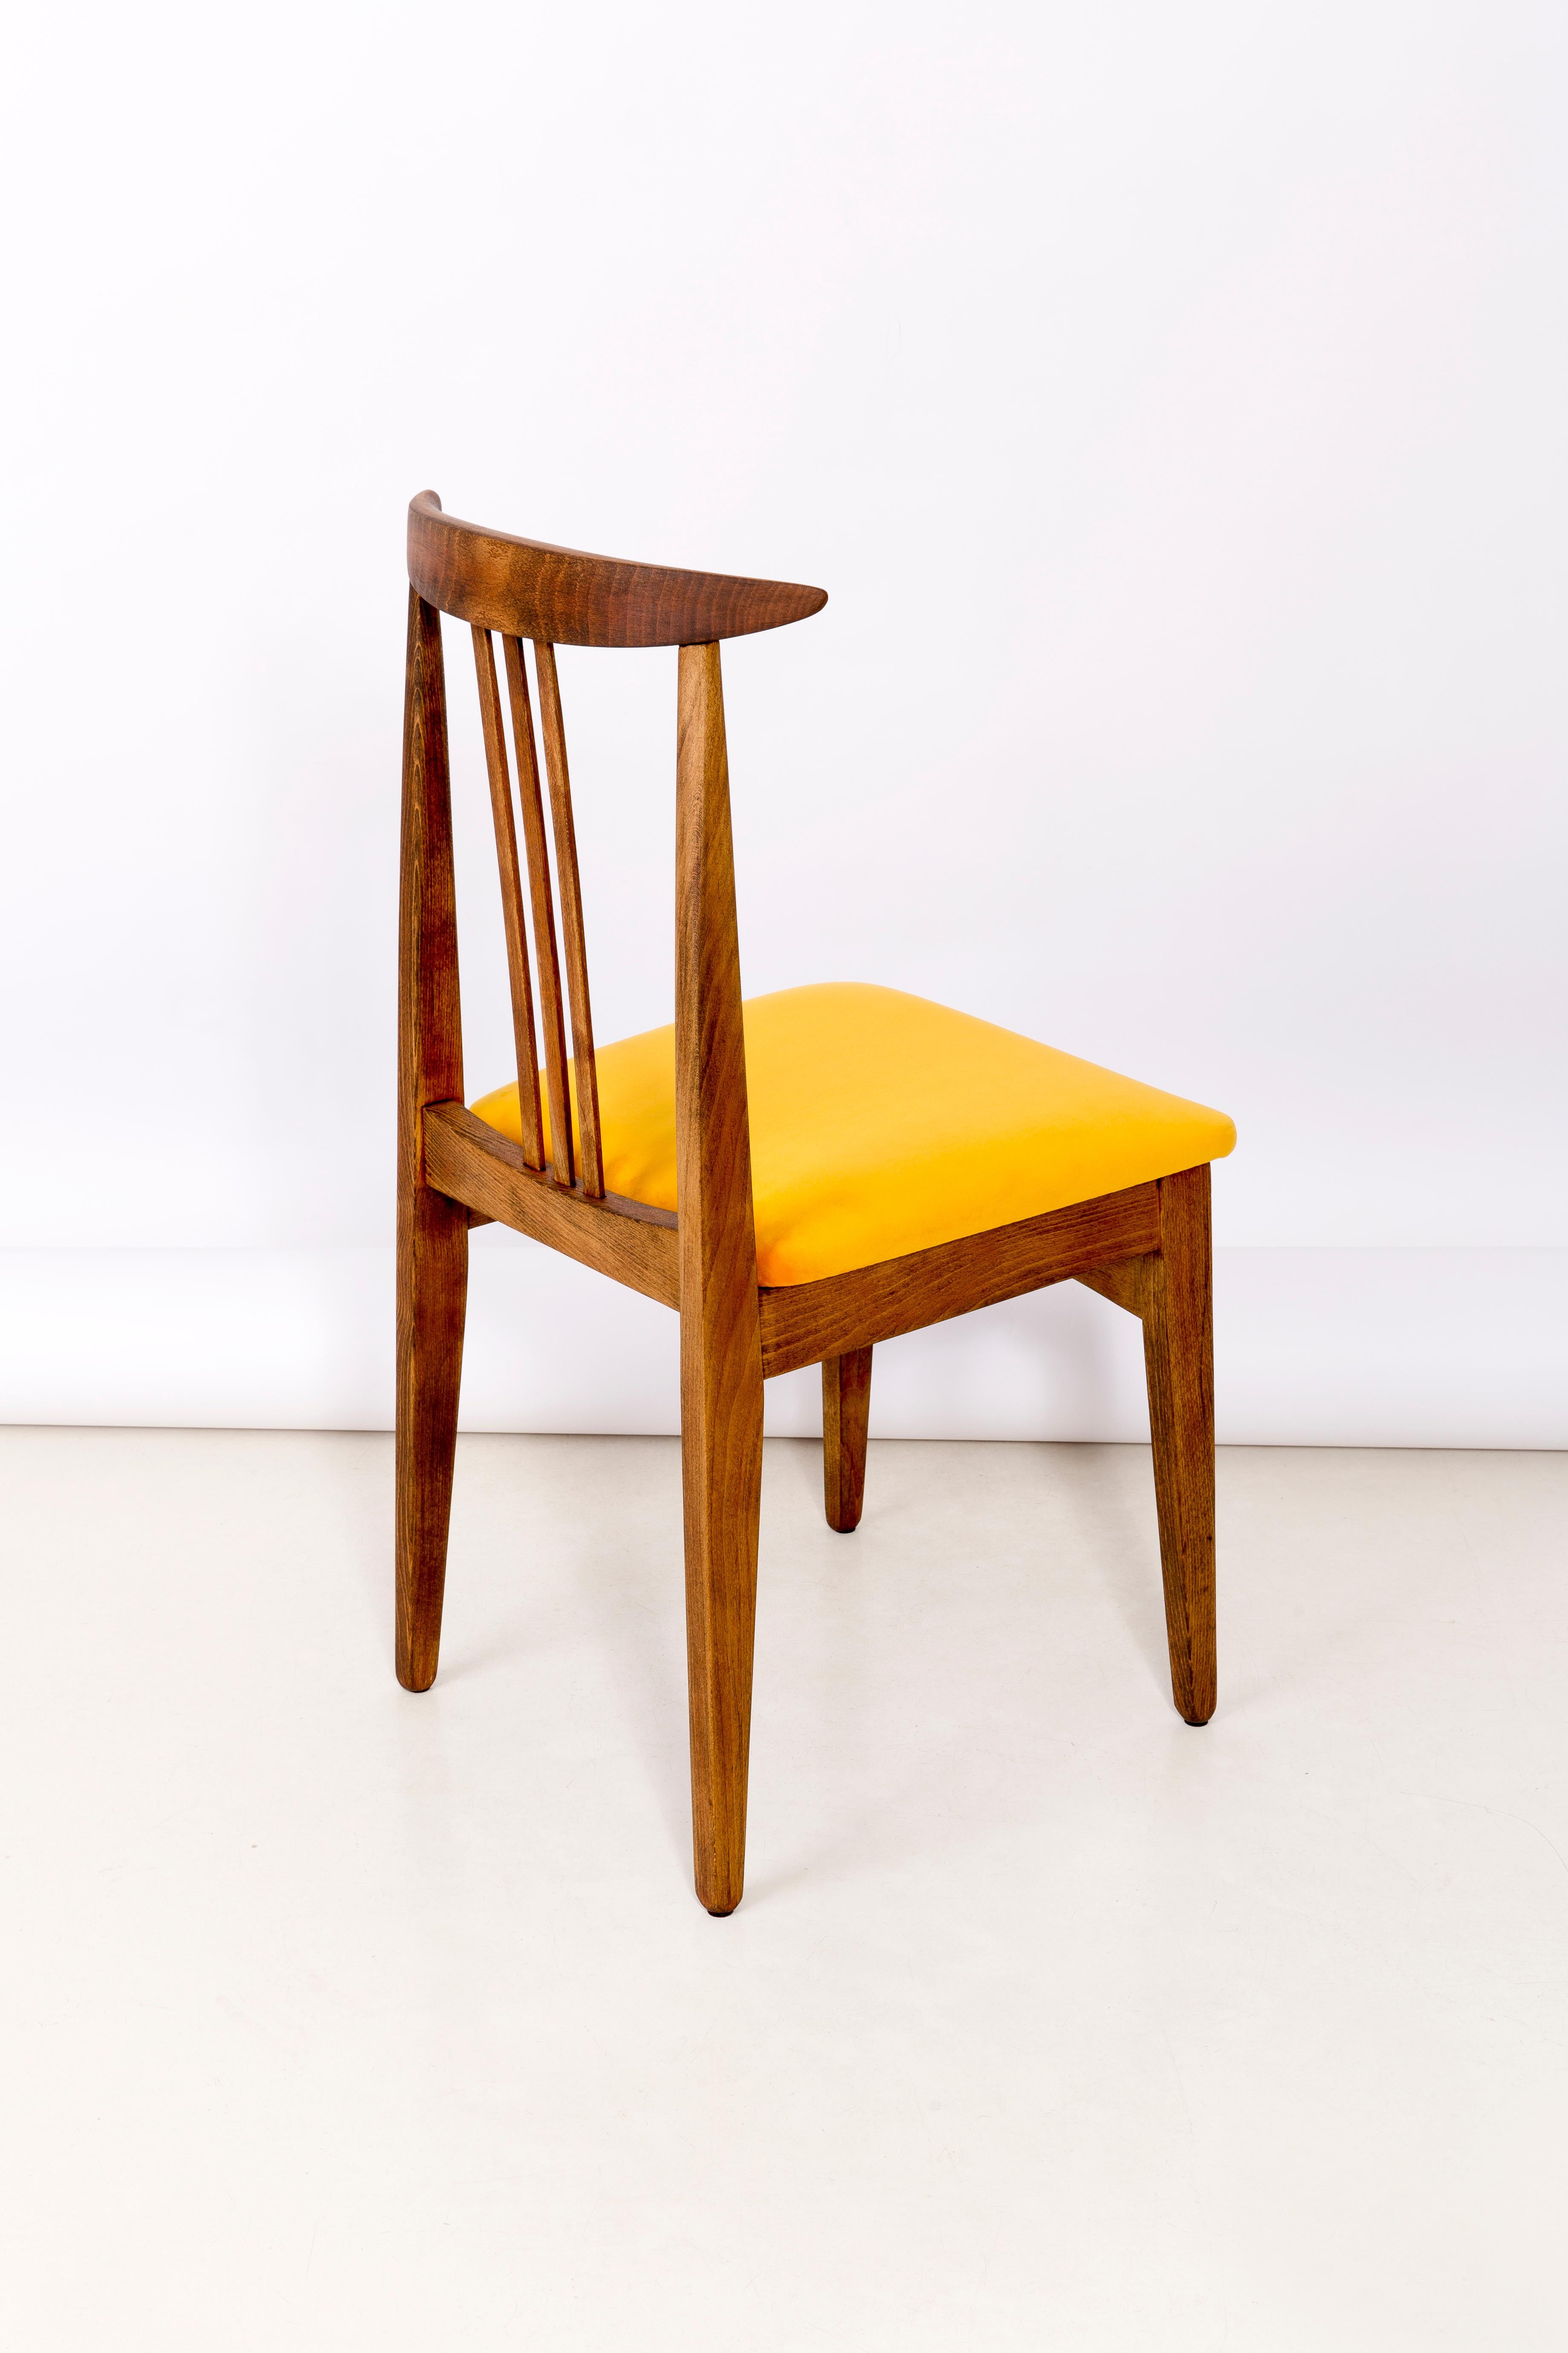 Set of Four Yellow Chairs, by Zielinski, Poland, 1960s For Sale 1